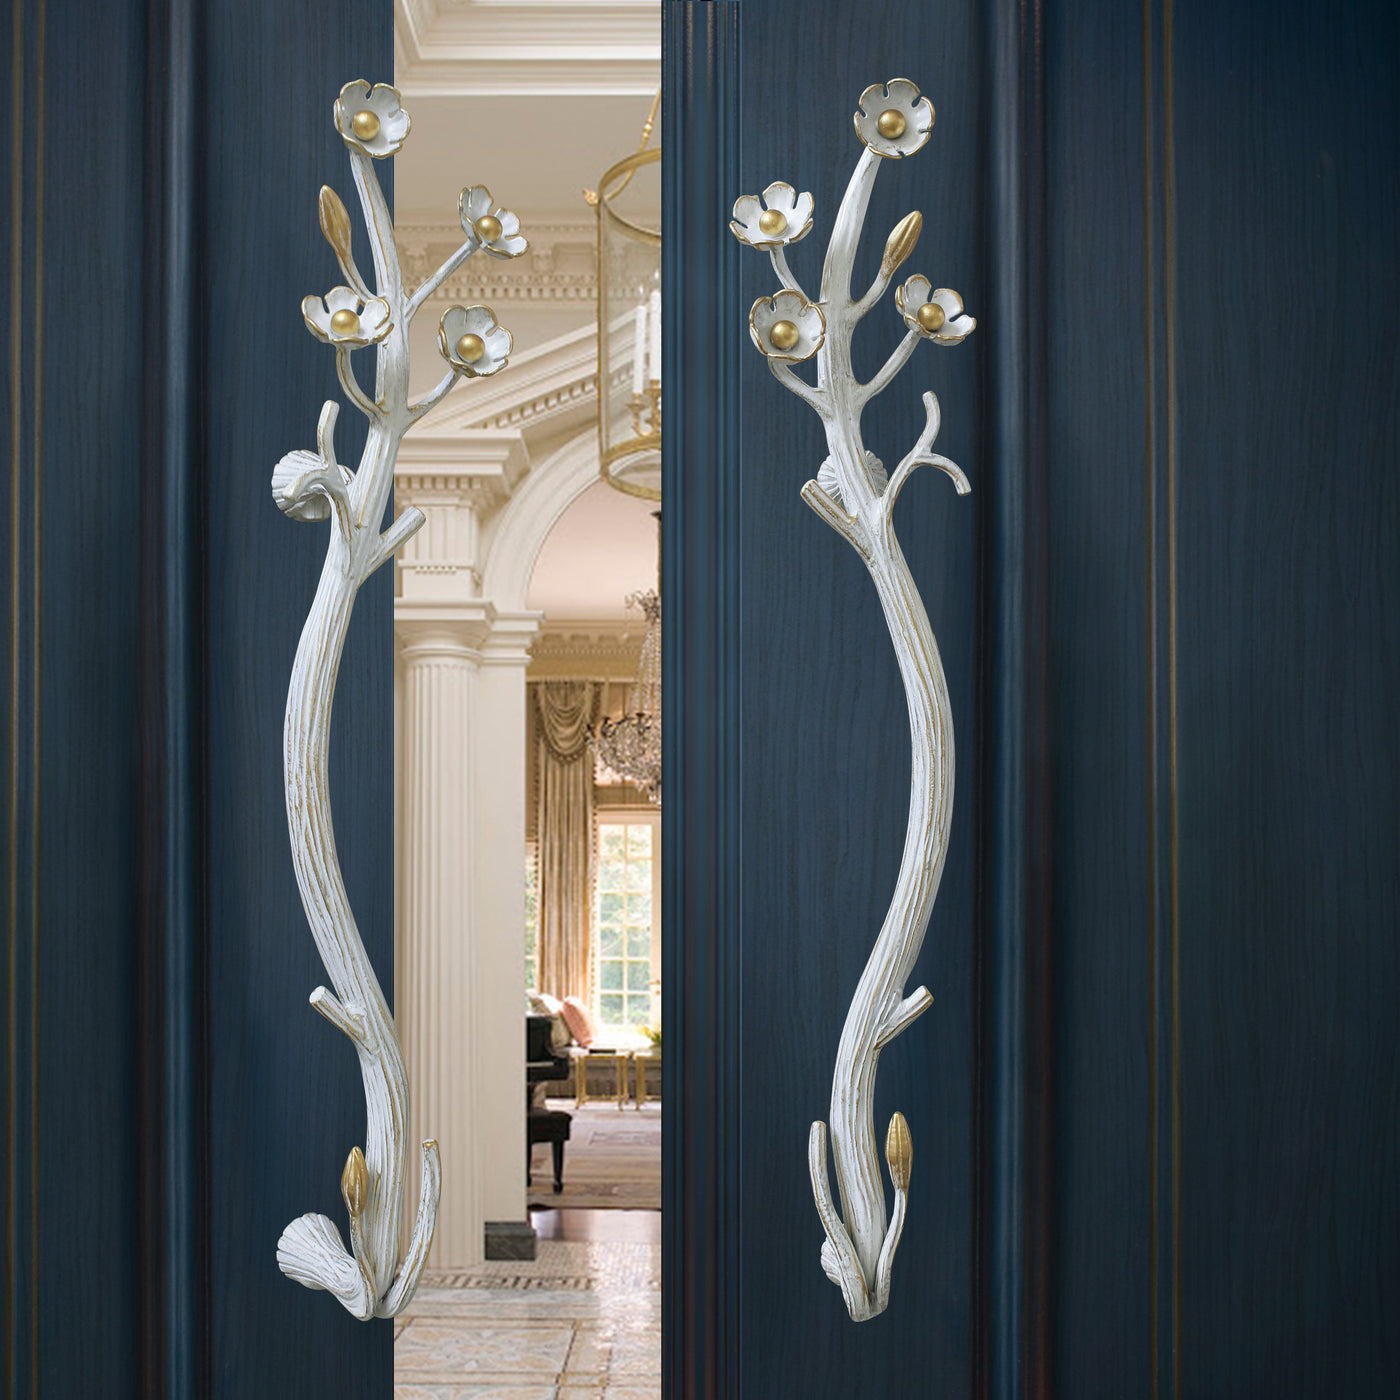 A pair of luxury steel handles with nature inspired branches and flowers mounted on a door